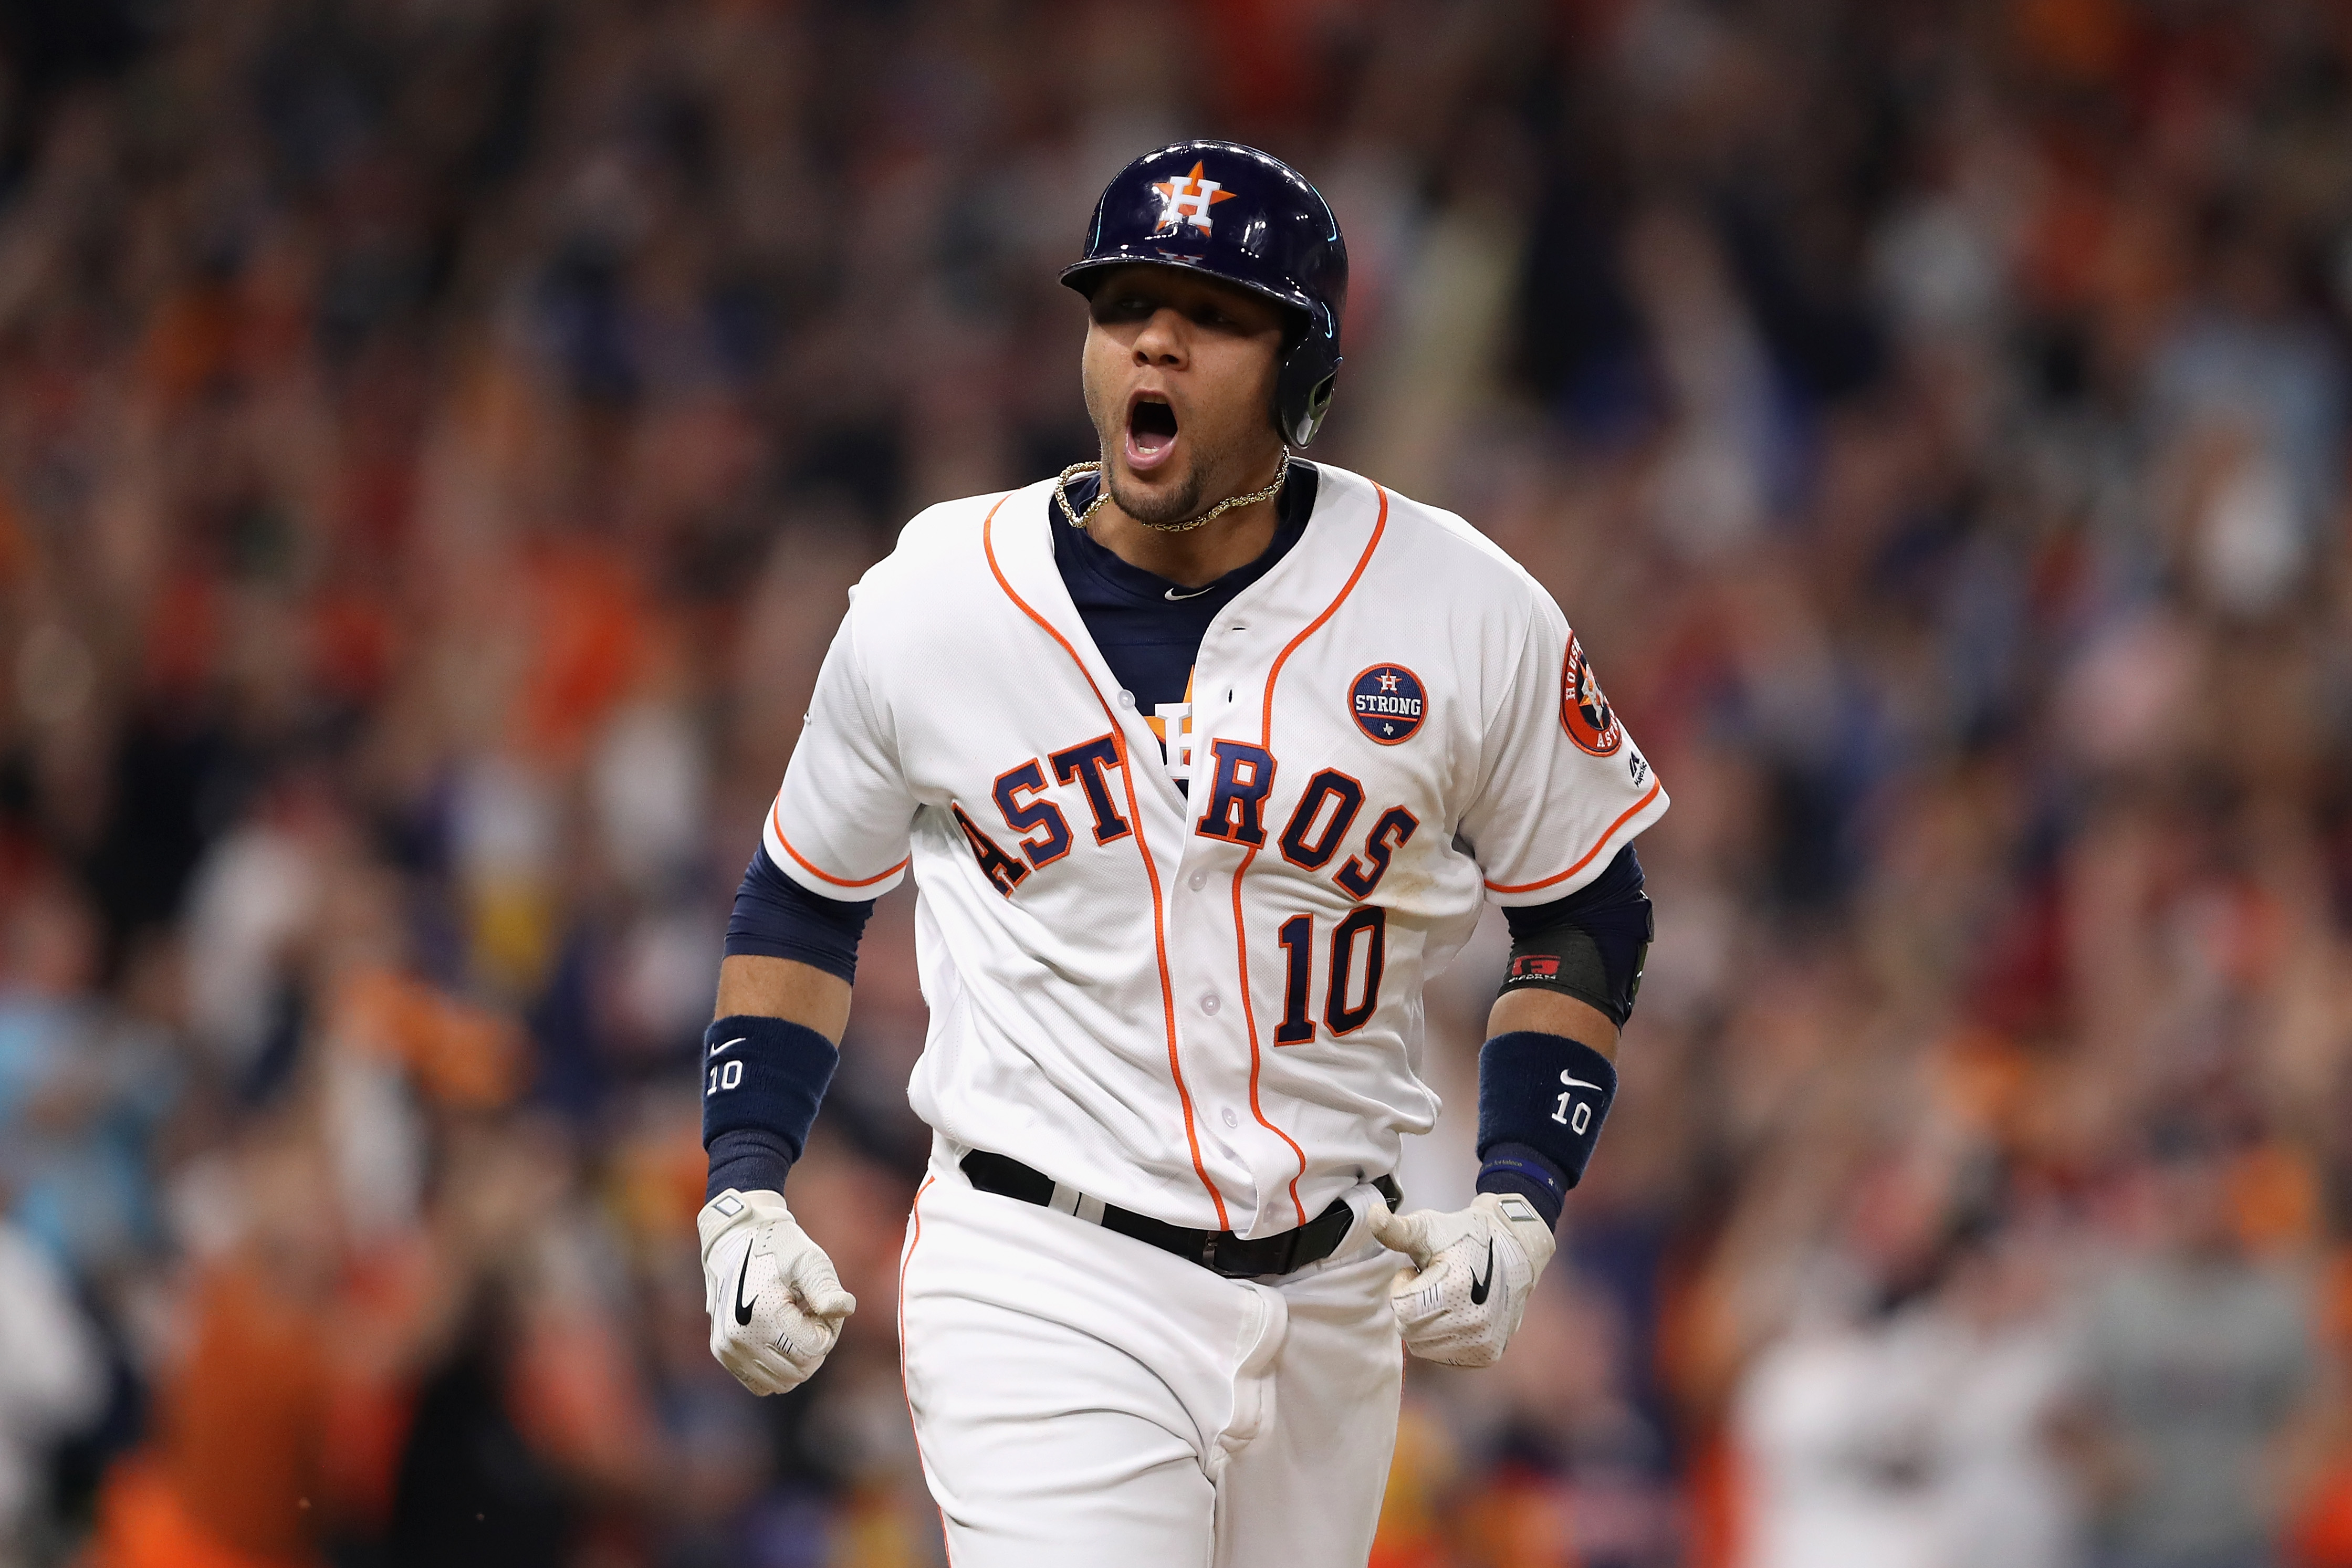 The Astros will soon need to decide if Yuli Gurriel is their best